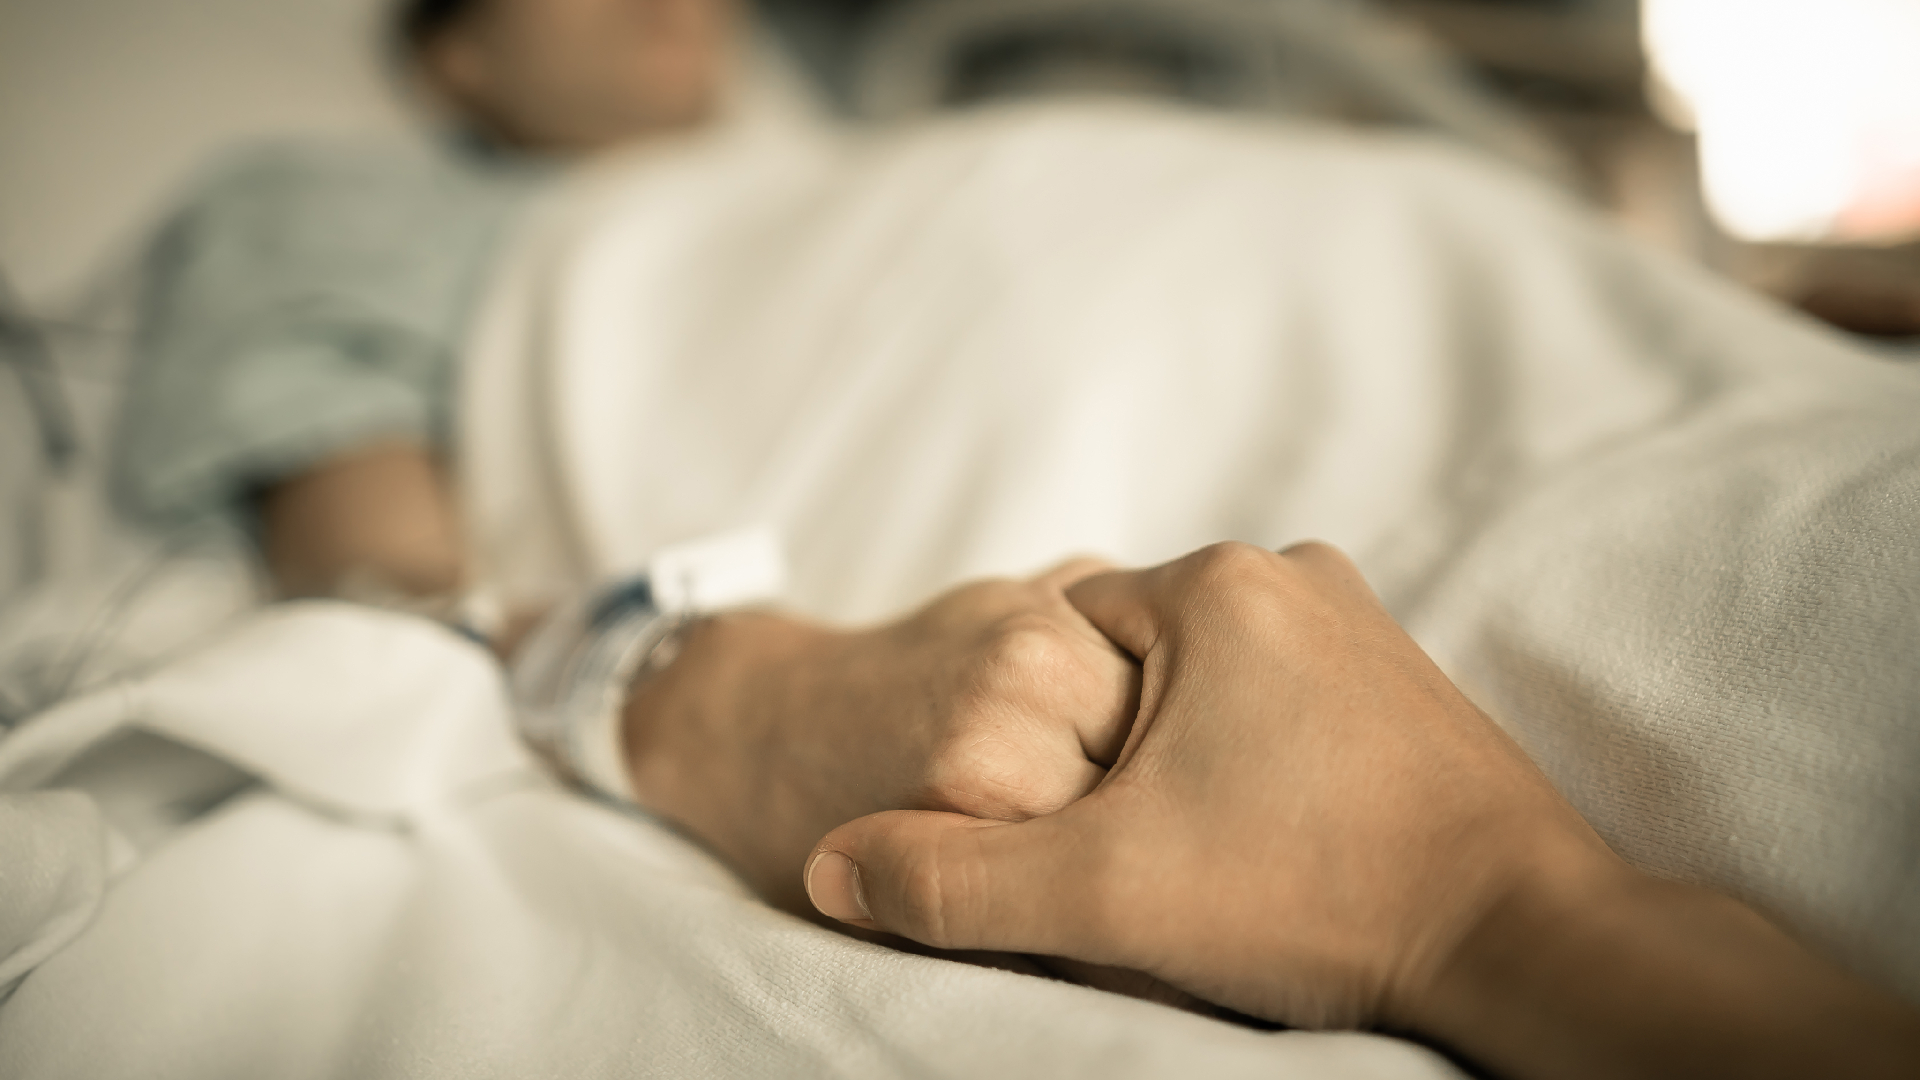 Two people holding hands in a hospital.